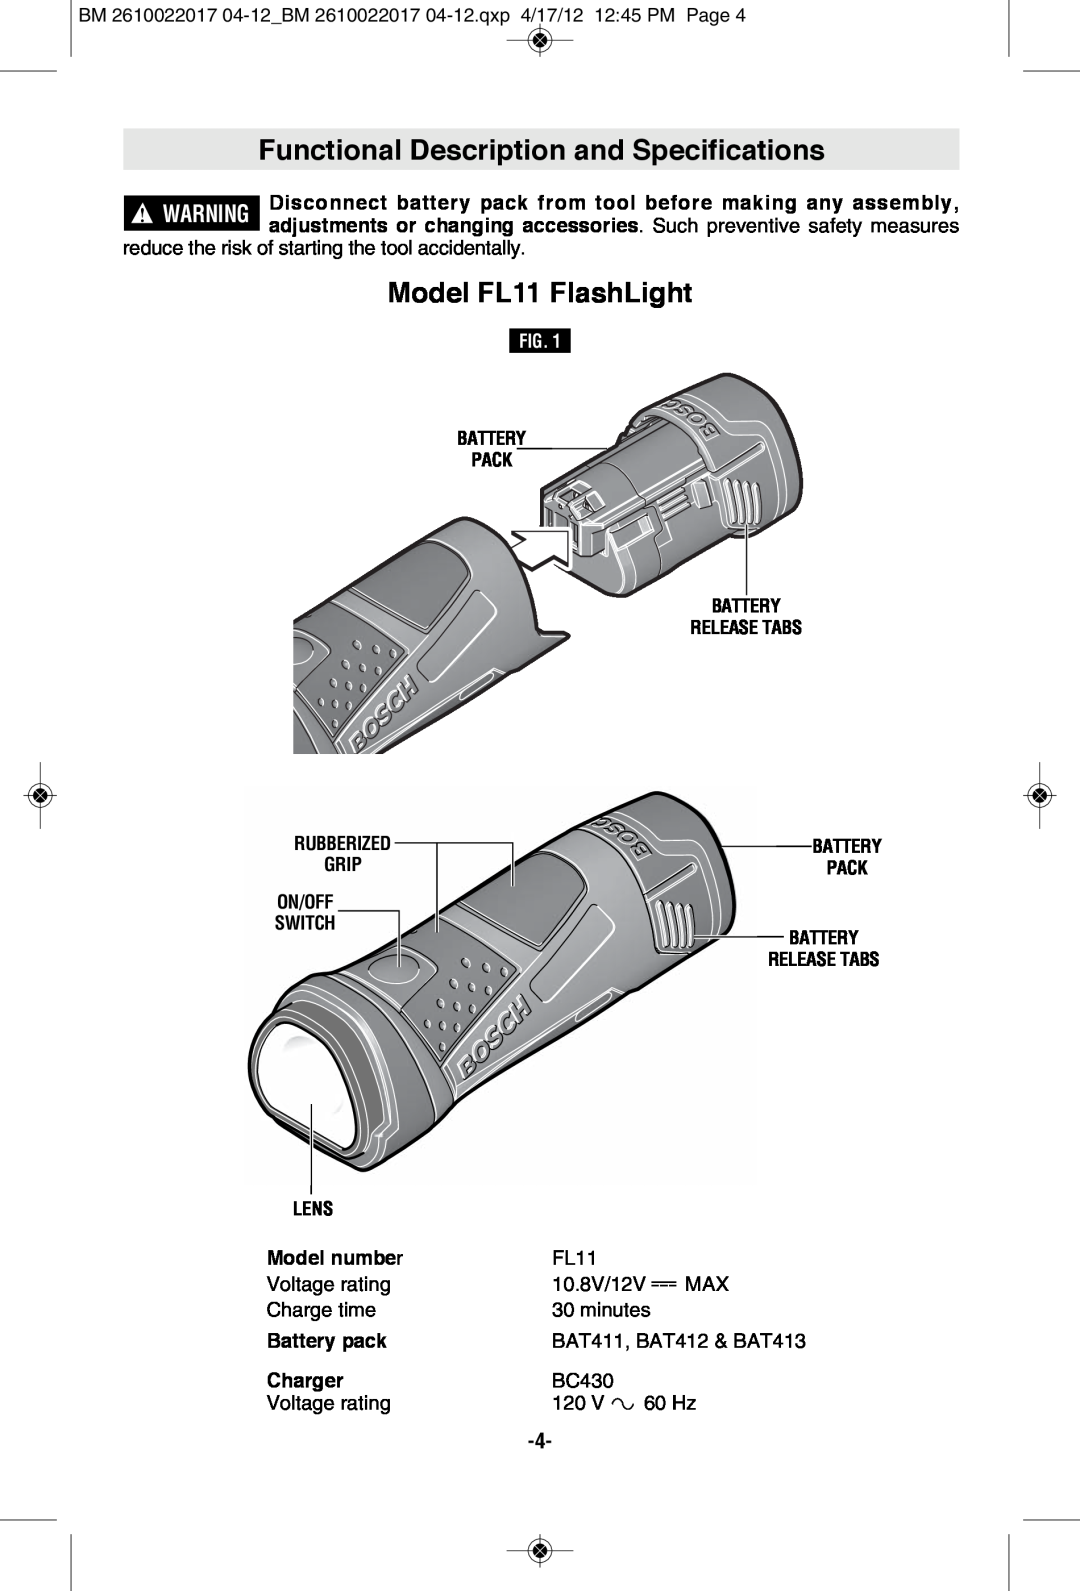 Bosch Power Tools FL11A manual Functional Description and Specifications, Model FL11 FlashLight, Battery Release Tabs 